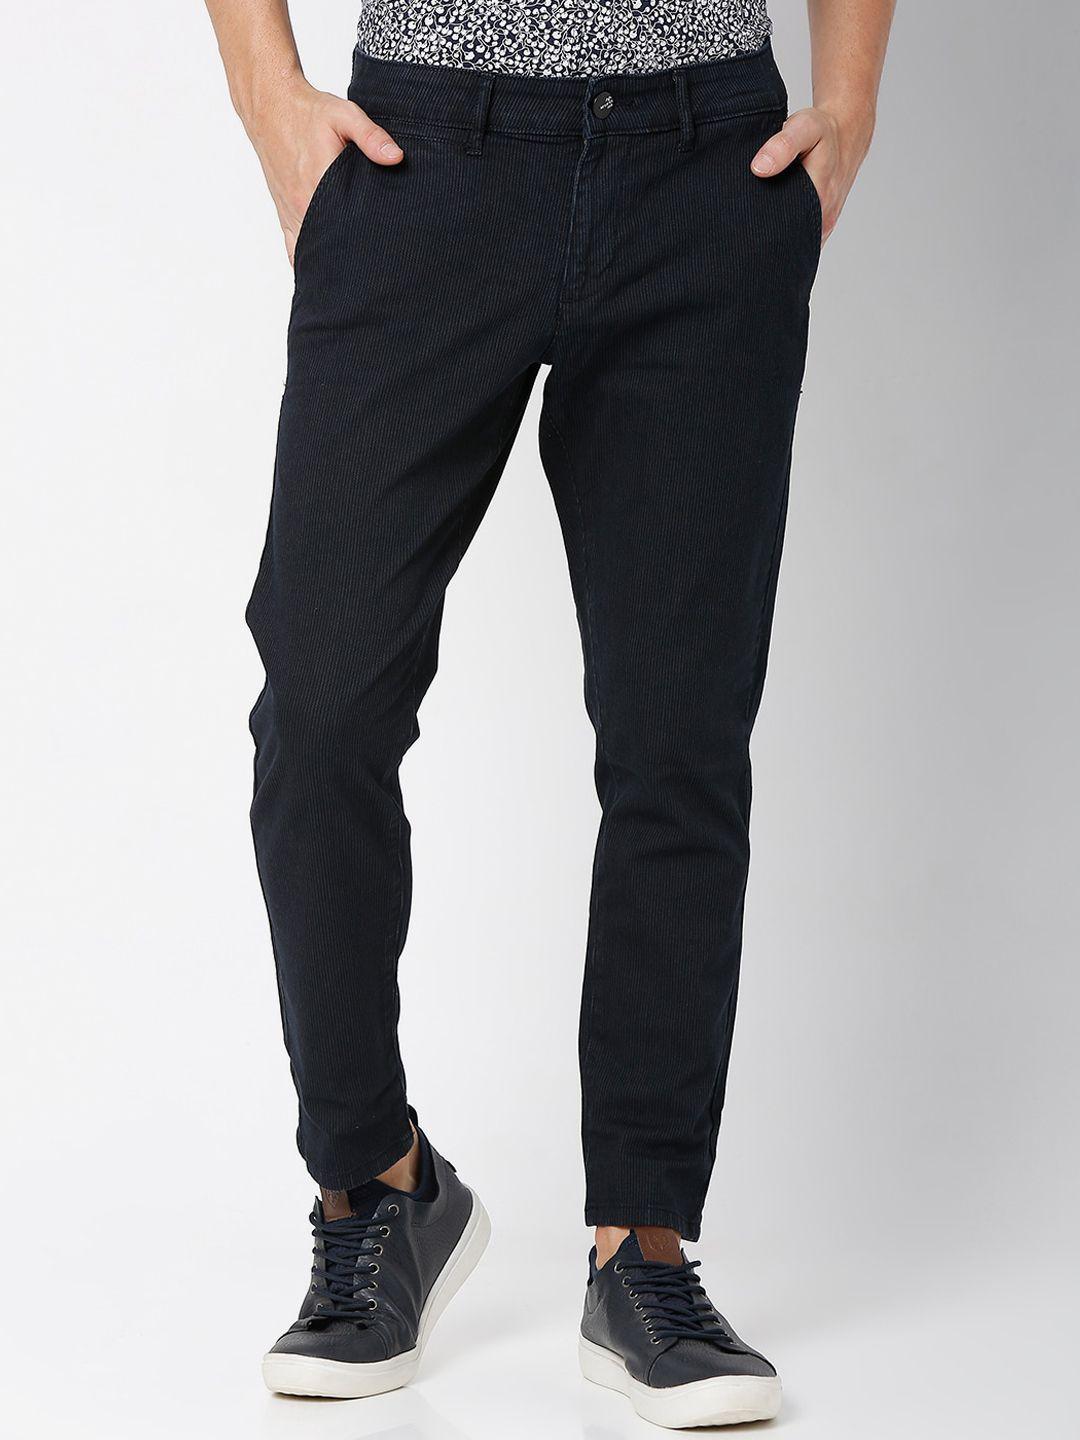 mufti-men-mid-rise-slim-fit-trousers